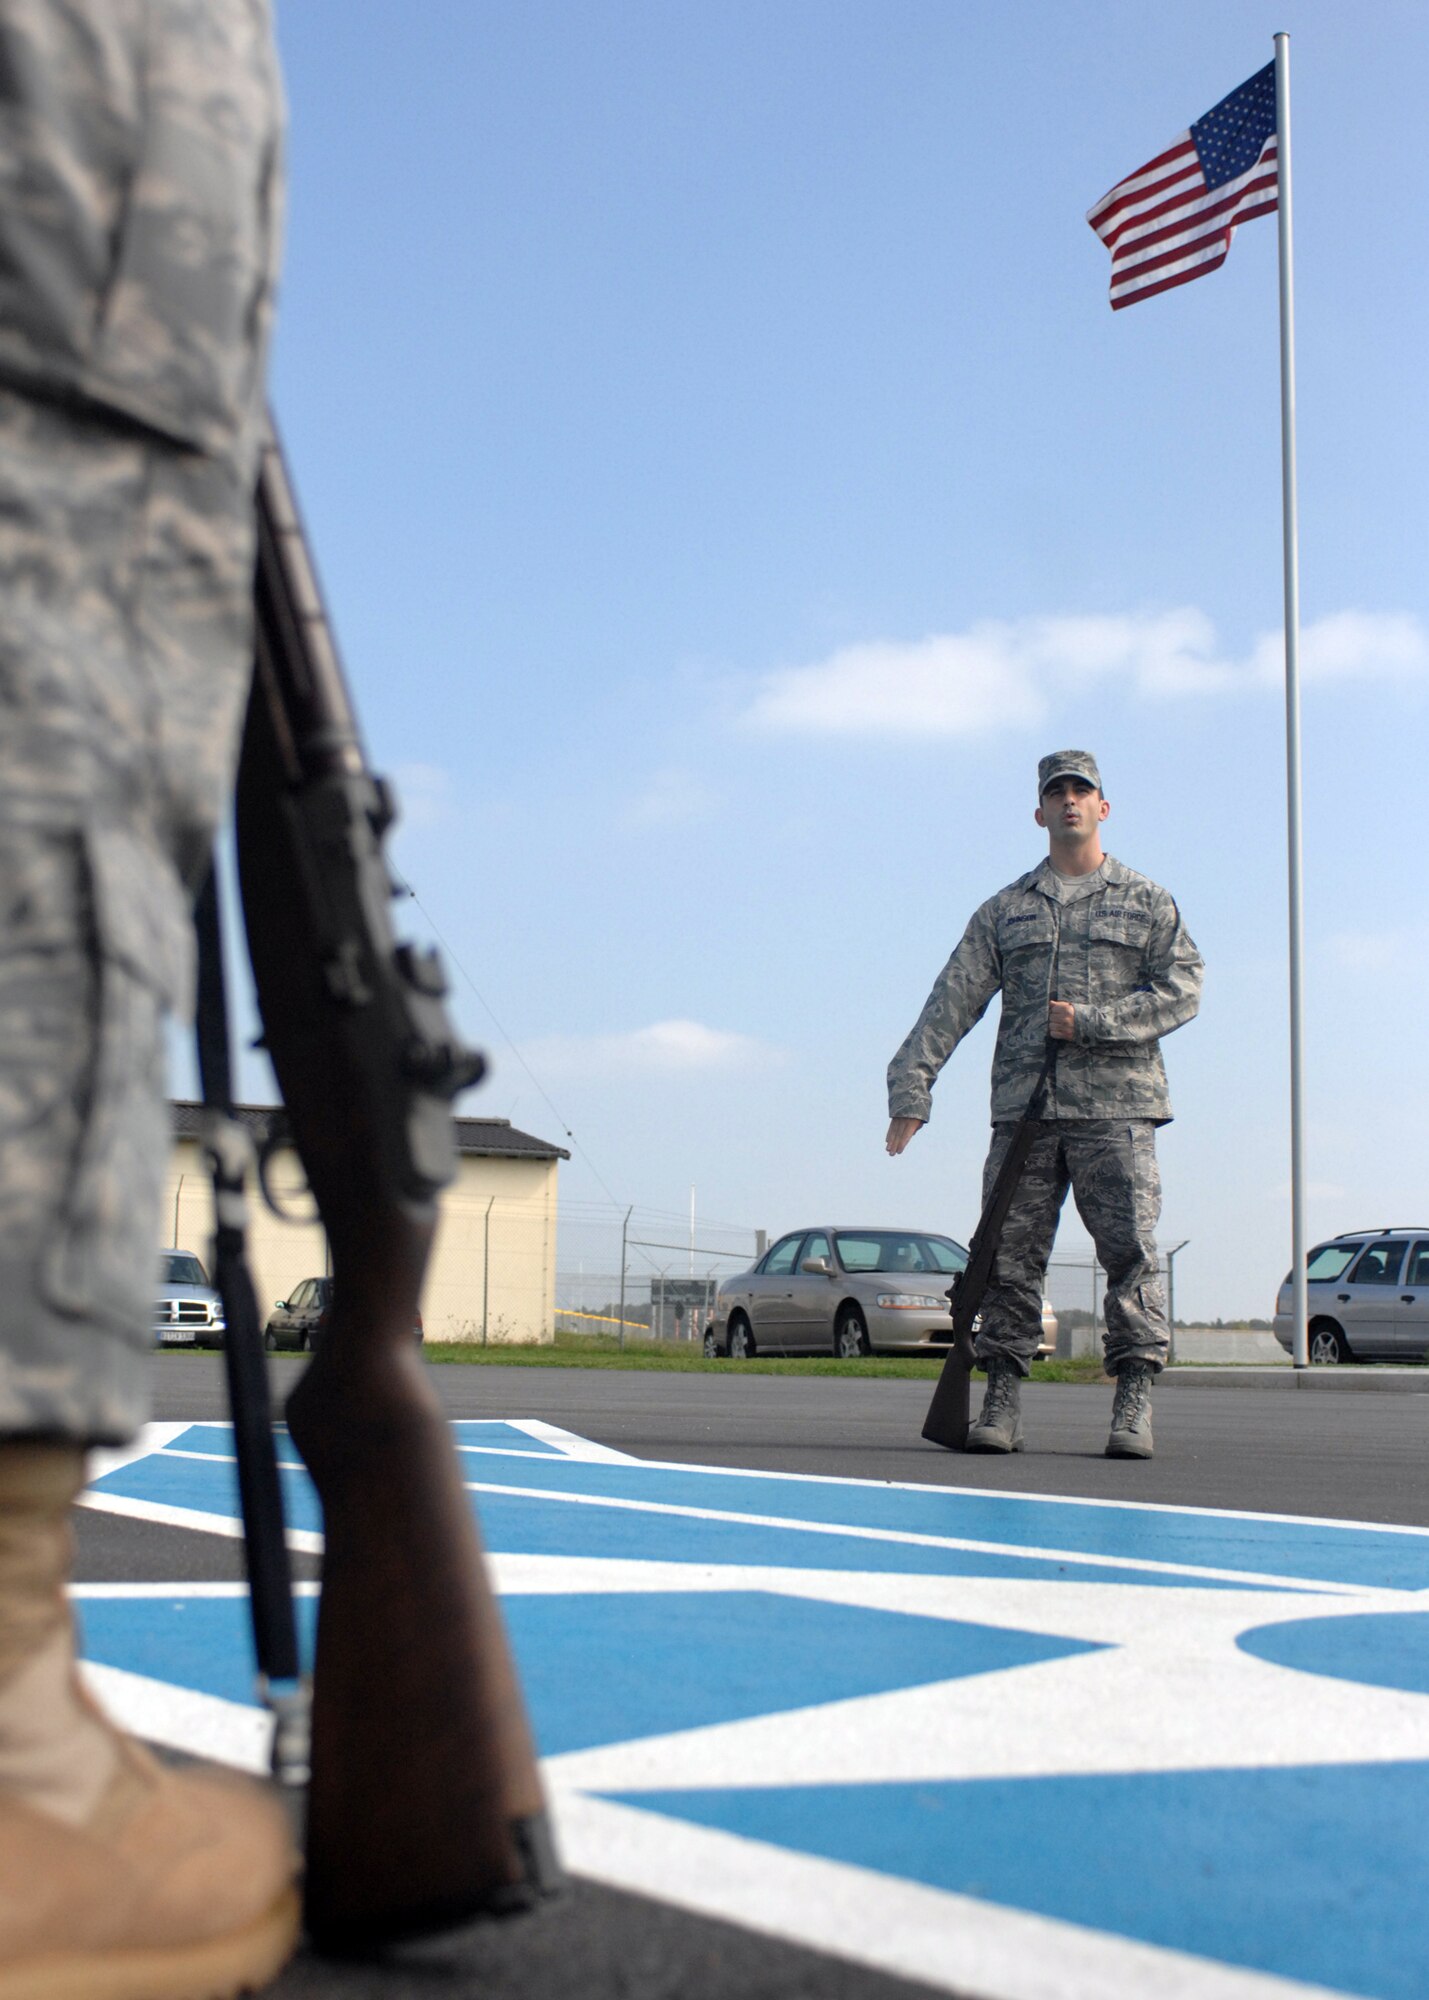 SPANGDAHLEM AIR BASE, Germany – Staff Sgt. Christopher Johnson, 52nd Fighter Wing Base Honor Guard Team Alpha Trainer, demonstrates the proper way to conduct a drill maneuver during practice August 27, 2008. (U.S. Air Force photo by Airman 1st Class Jenifer H. Calhoun)